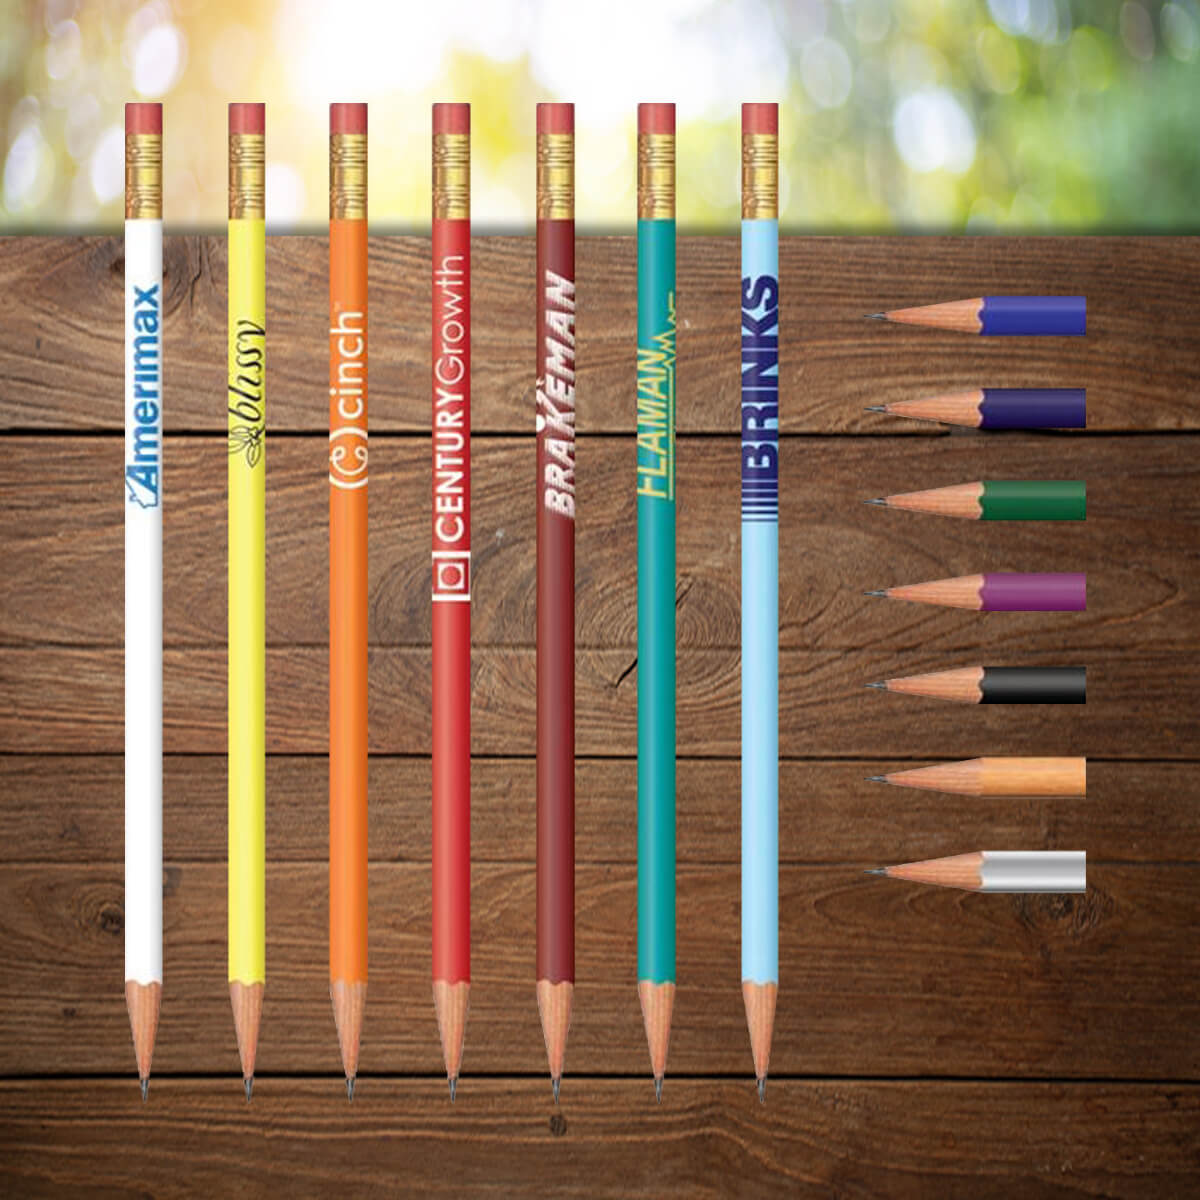 Variety of colors and imprints shown on custom pencils promotional writing implements by curative printing